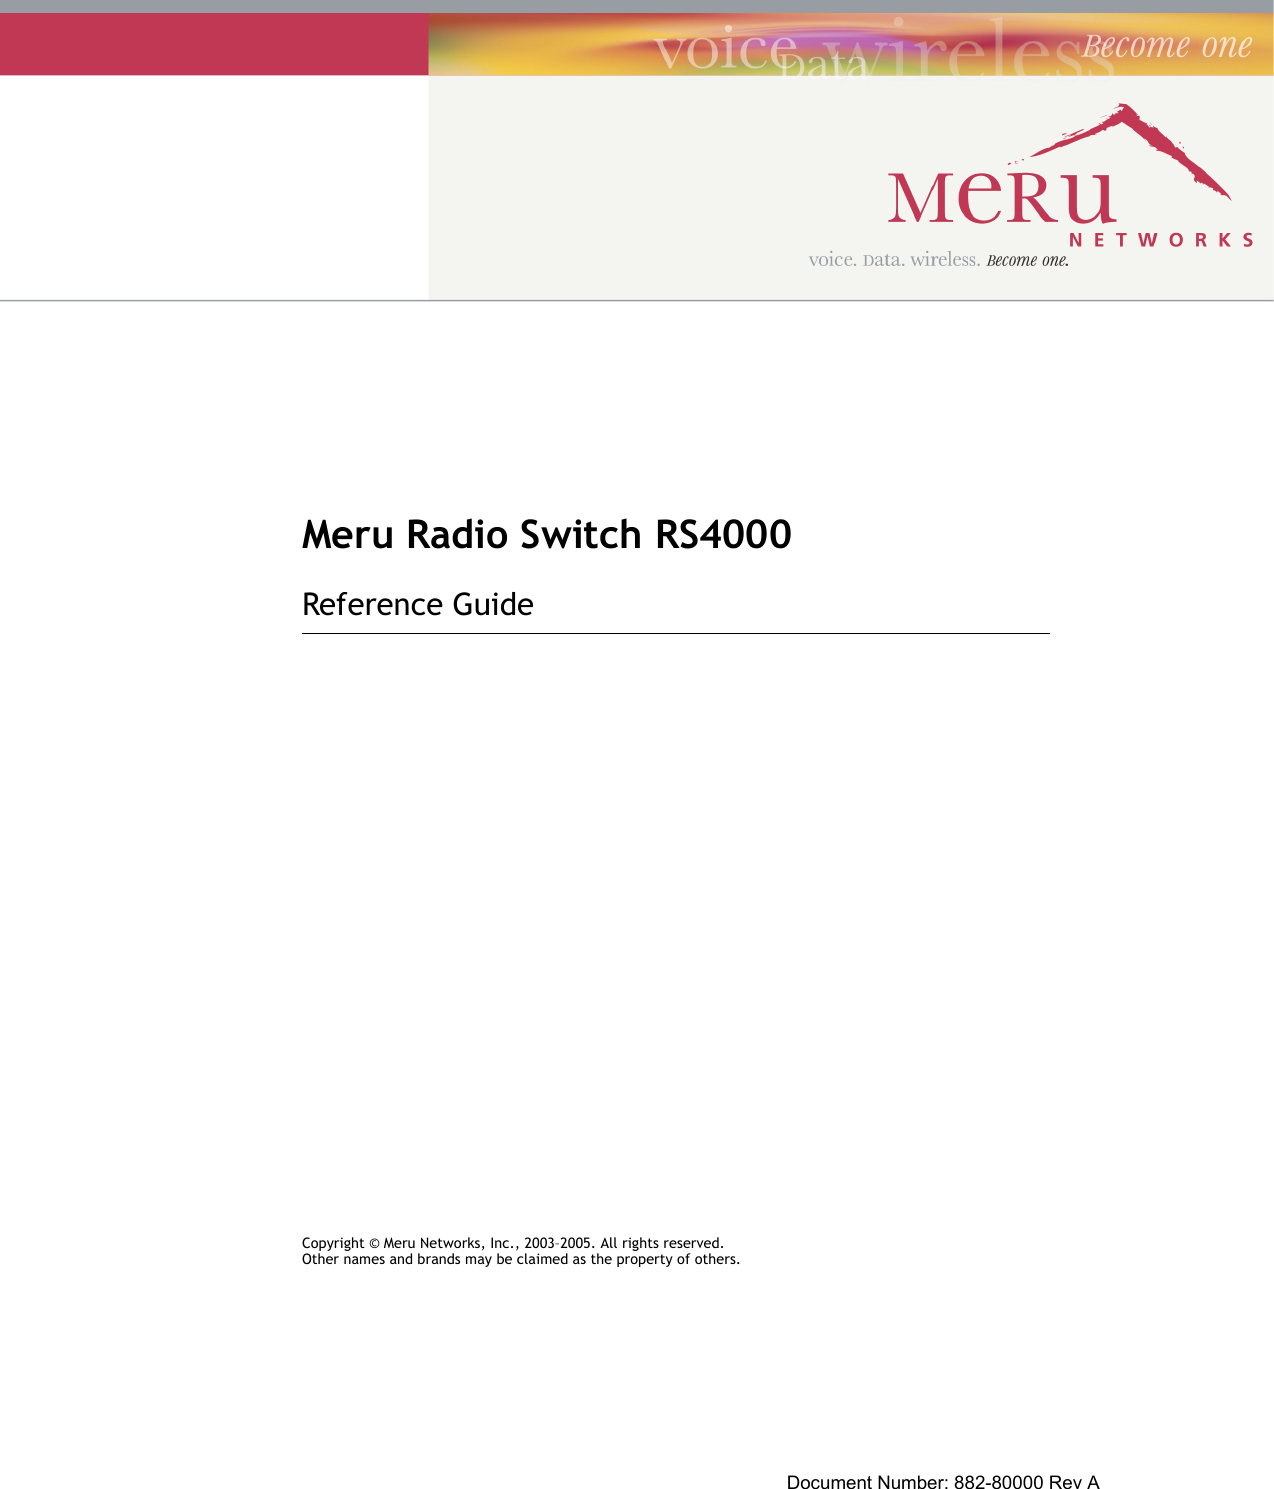 Meru Radio Switch RS4000Reference GuideCopyright © Meru Networks, Inc., 2003–2005. All rights reserved.Other names and brands may be claimed as the property of others.Document Number: 882-80000 Rev A